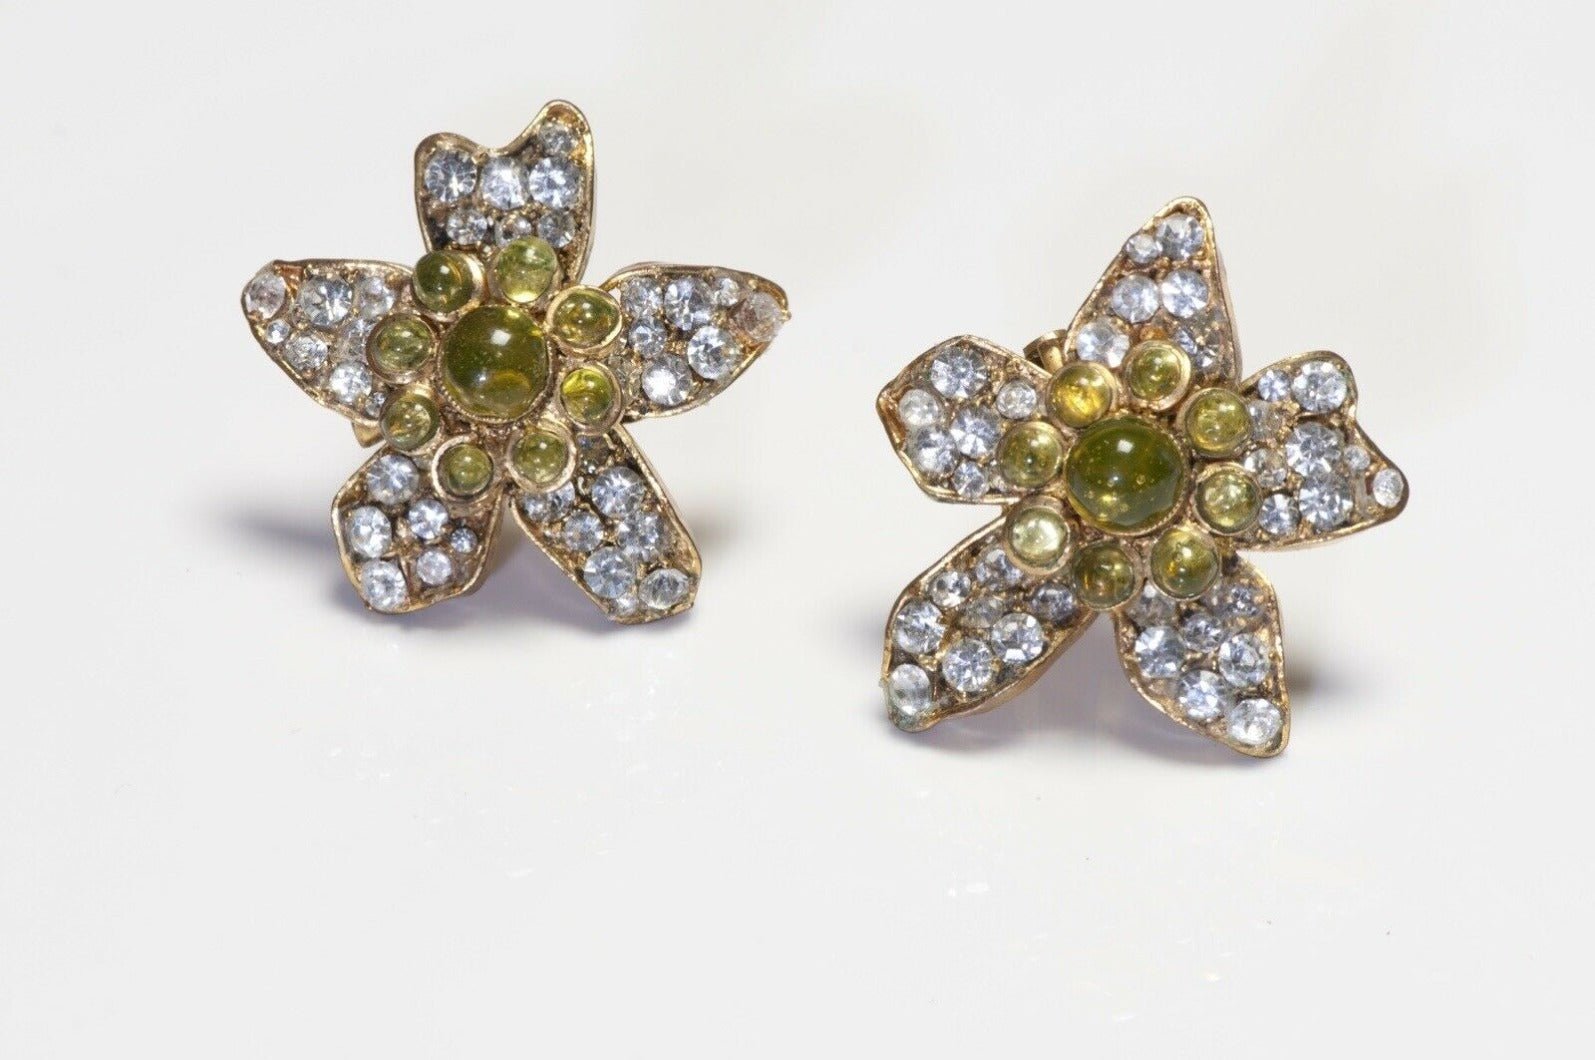 CHANEL Paris 1990’s Maison Gripoix Green Glass Crystal Camellia Flower Earrings - DSF Antique Jewelry